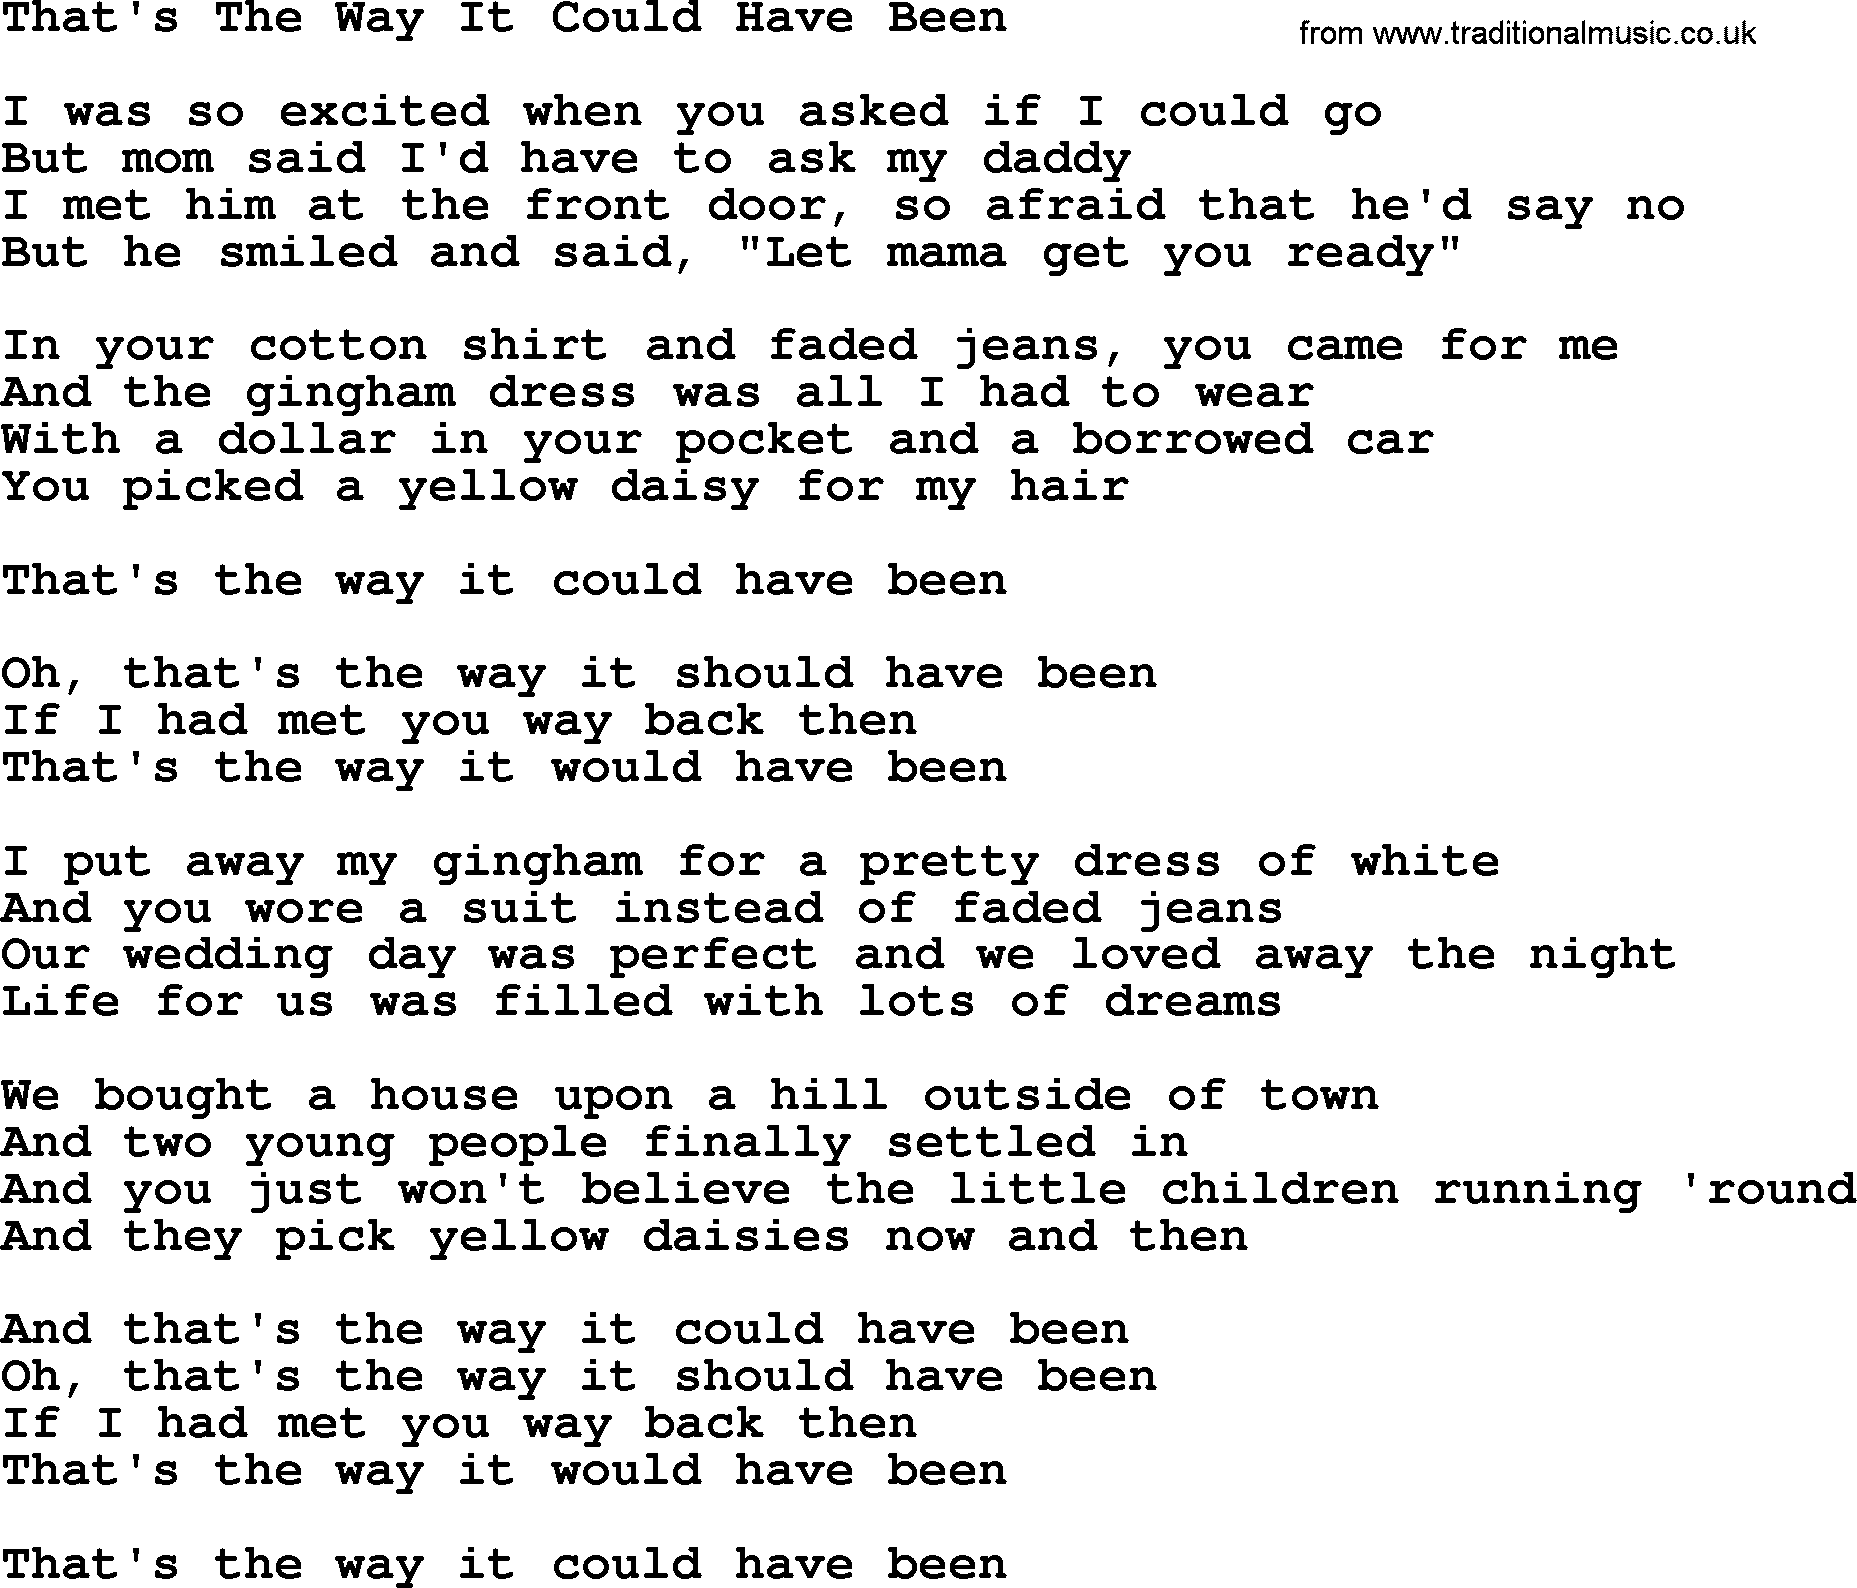 Dolly Parton song That's The Way It Could Have Been.txt lyrics